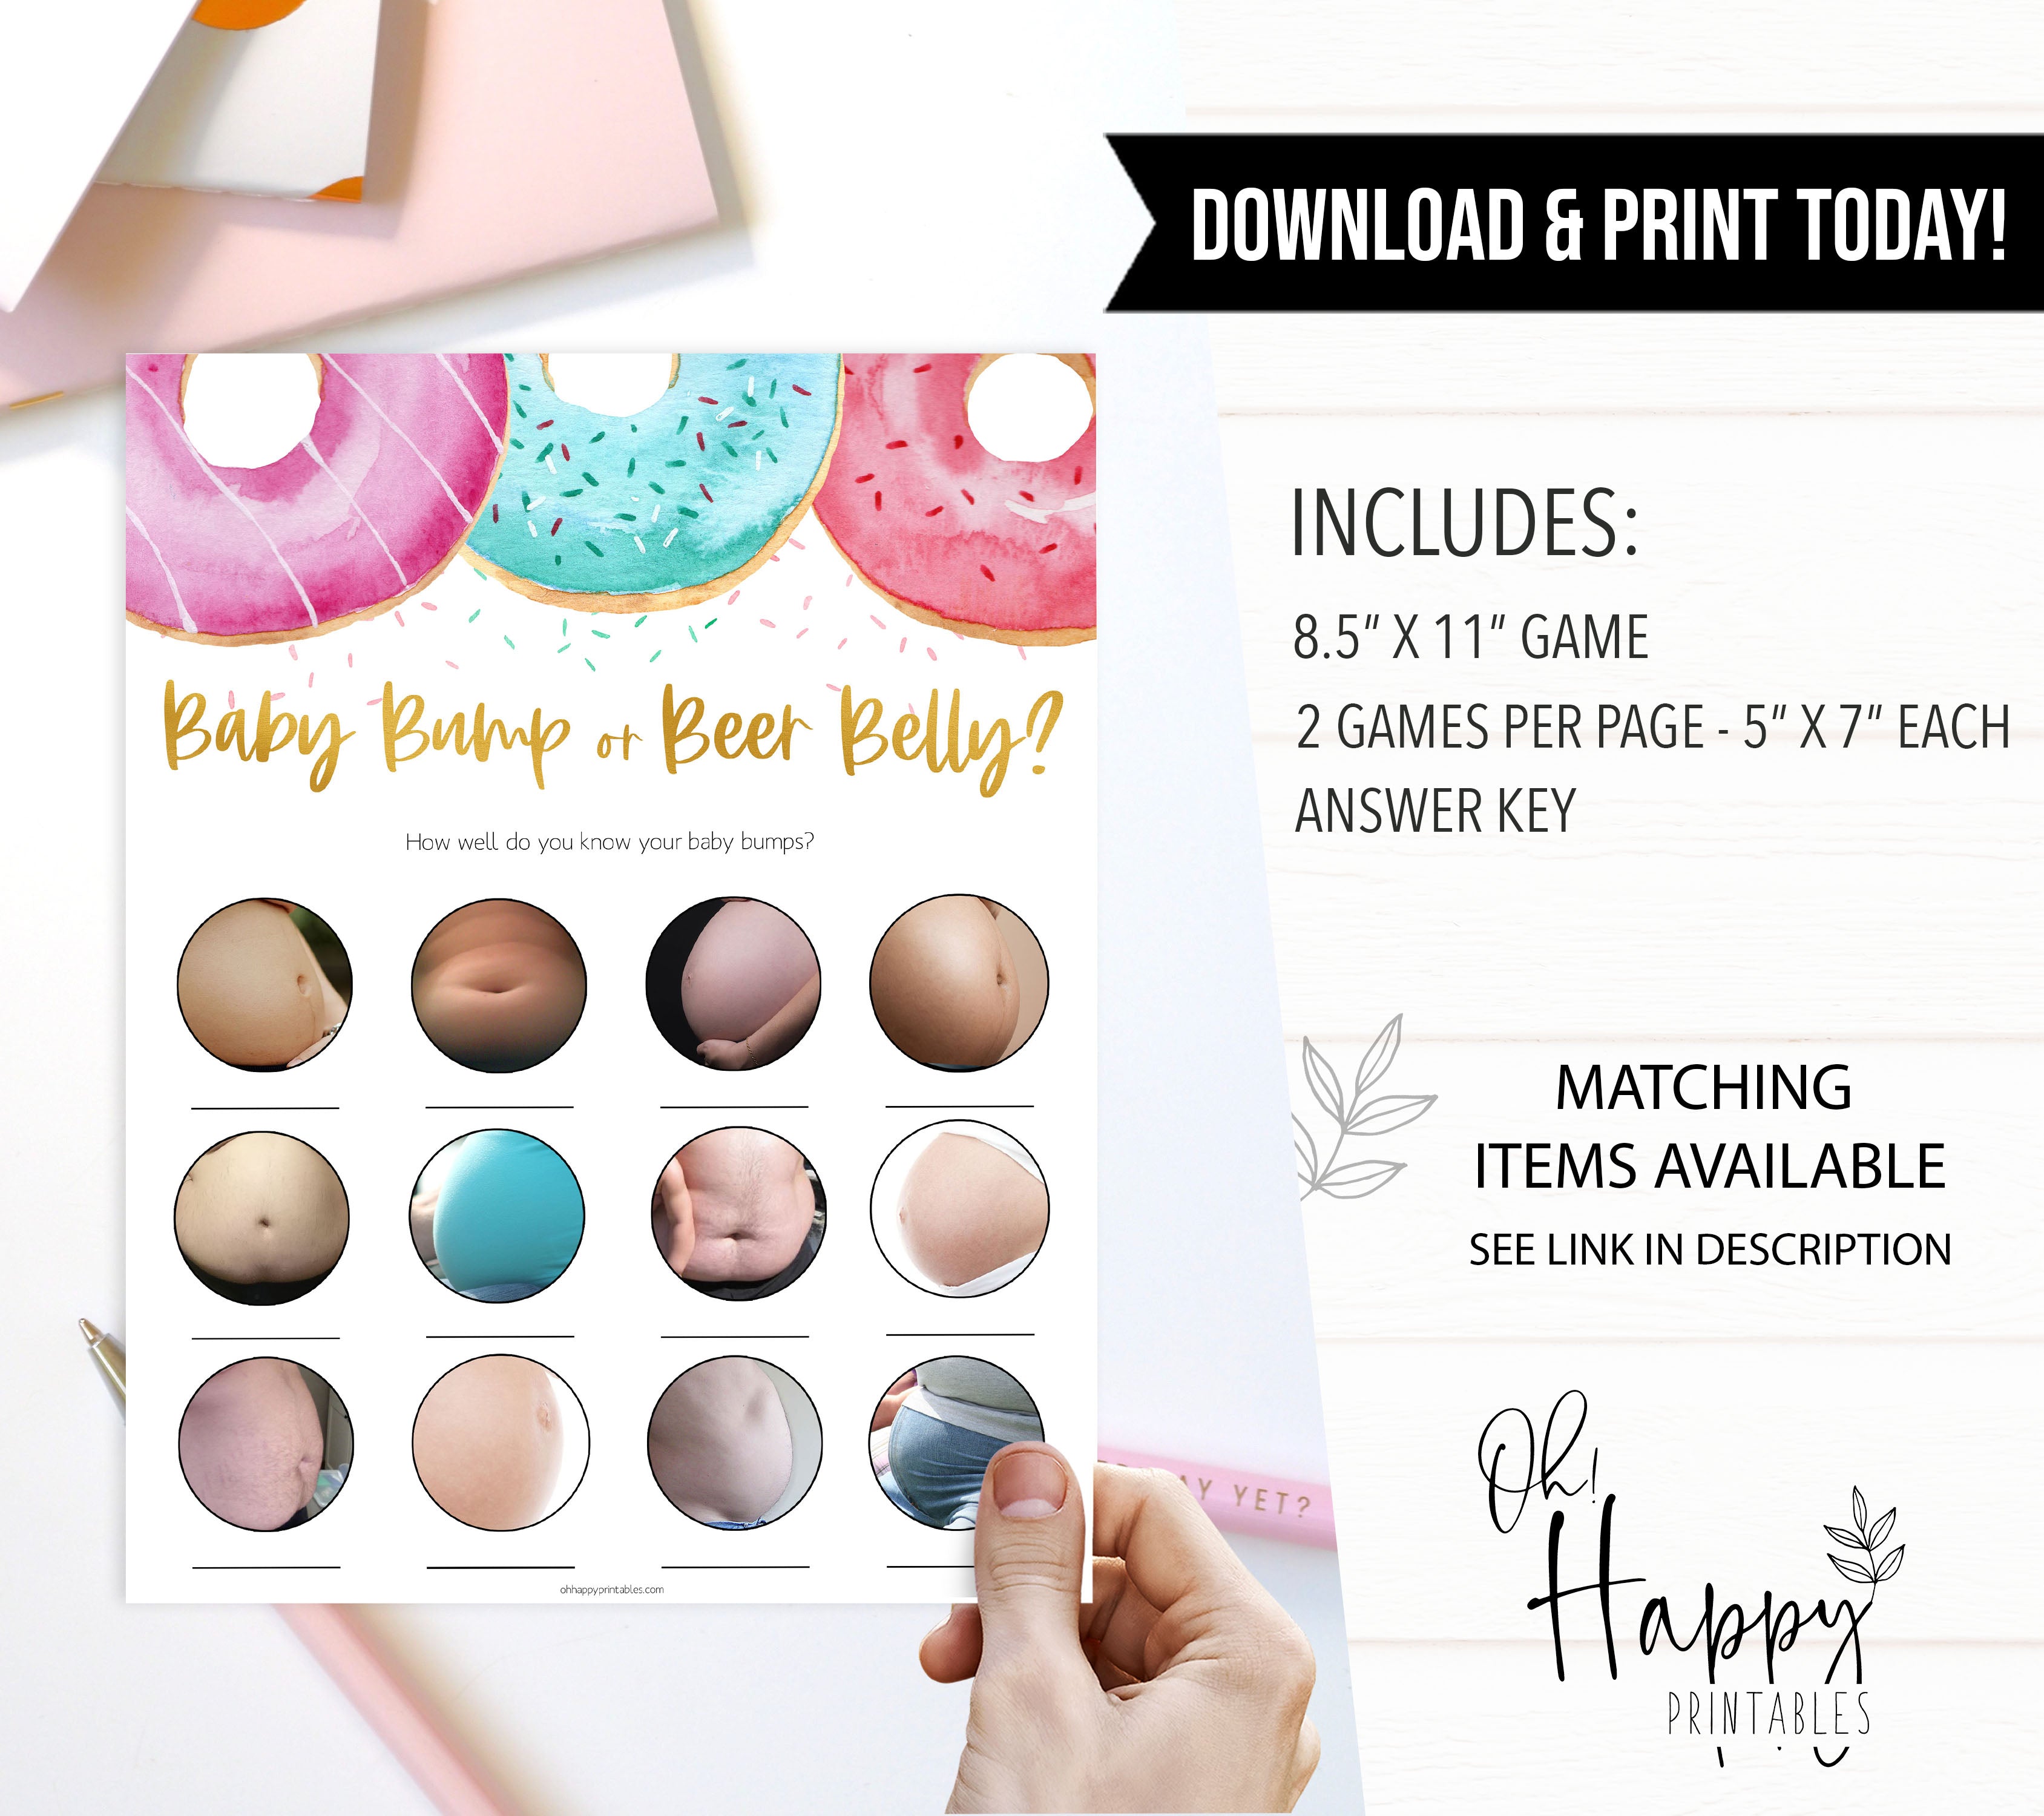 baby bump or beer belly game, Printable baby shower games, donut baby games, baby shower games, fun baby shower ideas, top baby shower ideas, donut sprinkles baby shower, baby shower games, fun donut baby shower ideas